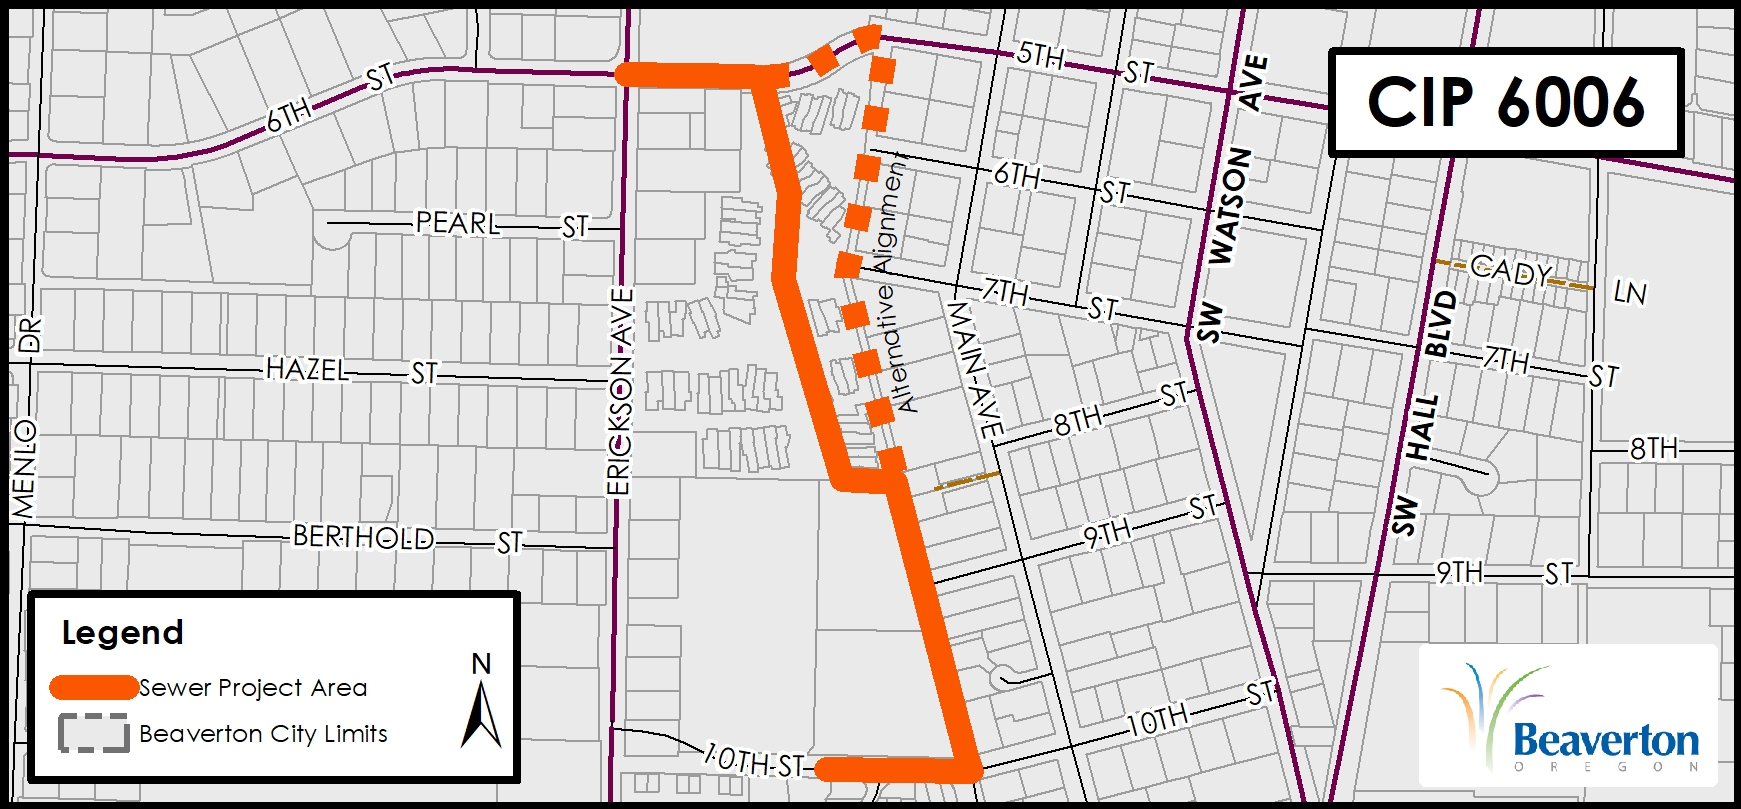 CIP 6006 Sanitary Sewer Project Map for section along SW Allen Boulevard, SW Taralynn Avenue, SW Cypress Lane, SW Biggi Terrace and SW 10th Avenue.